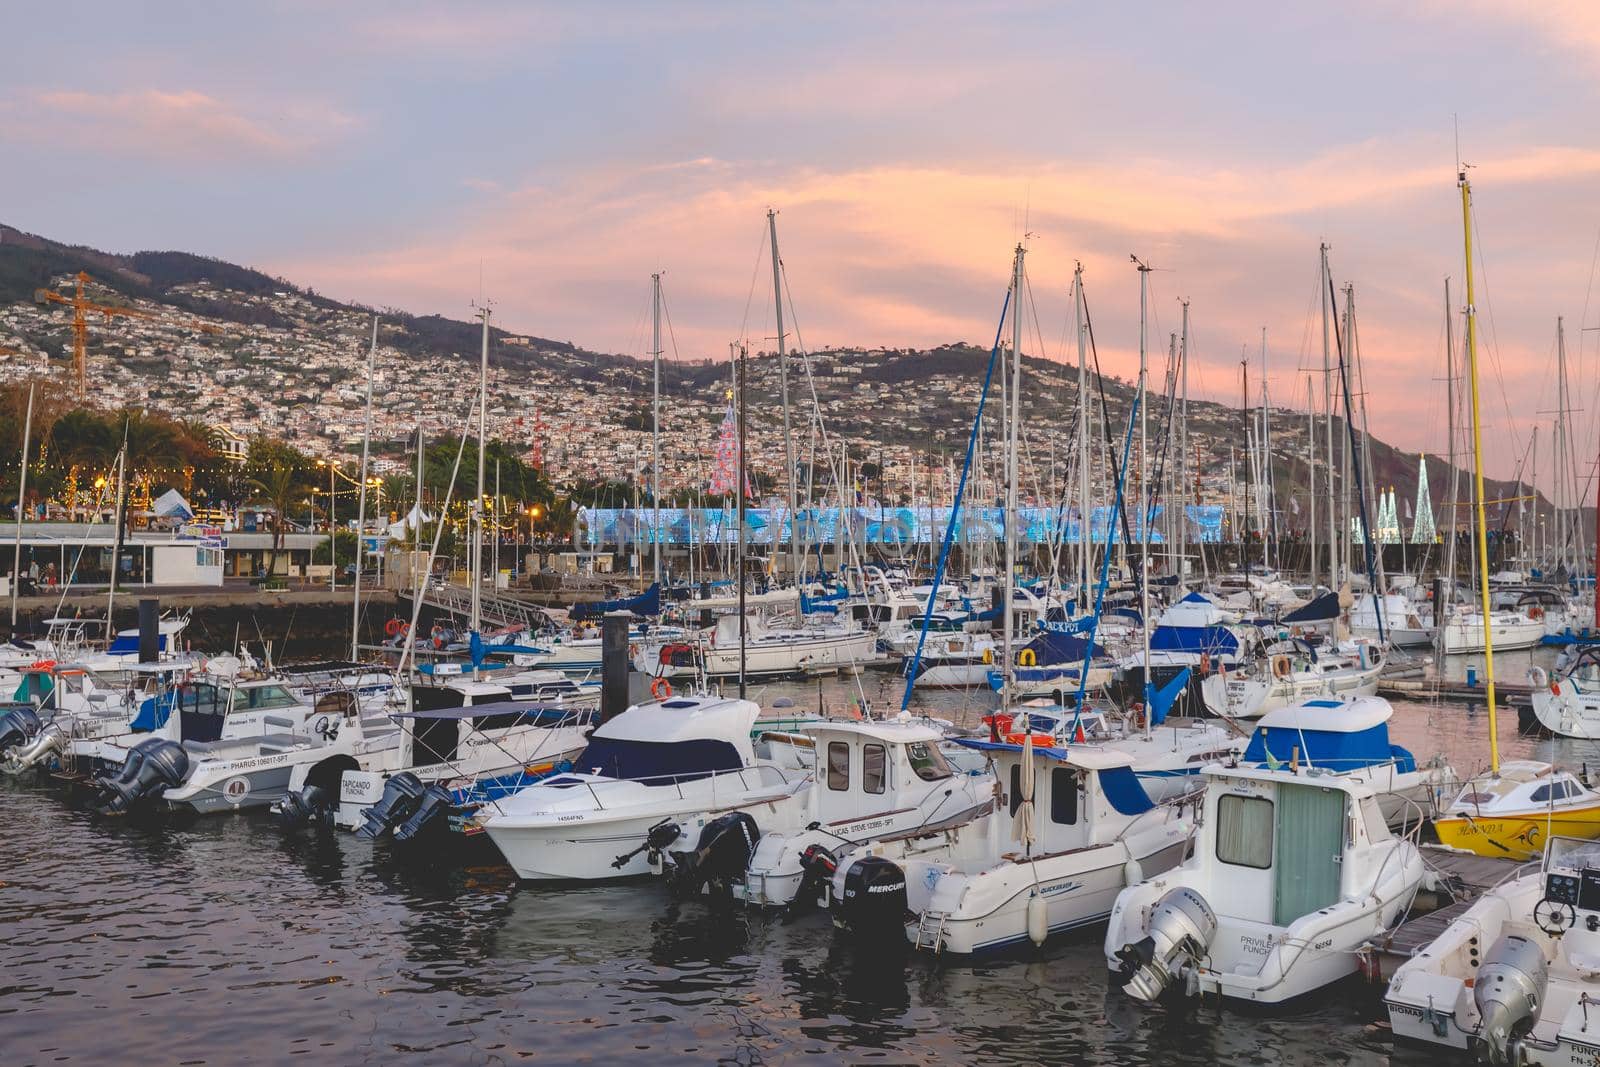 Funchal marina in the evening where people gather to watch the new year fireworks by AtlanticEUROSTOXX